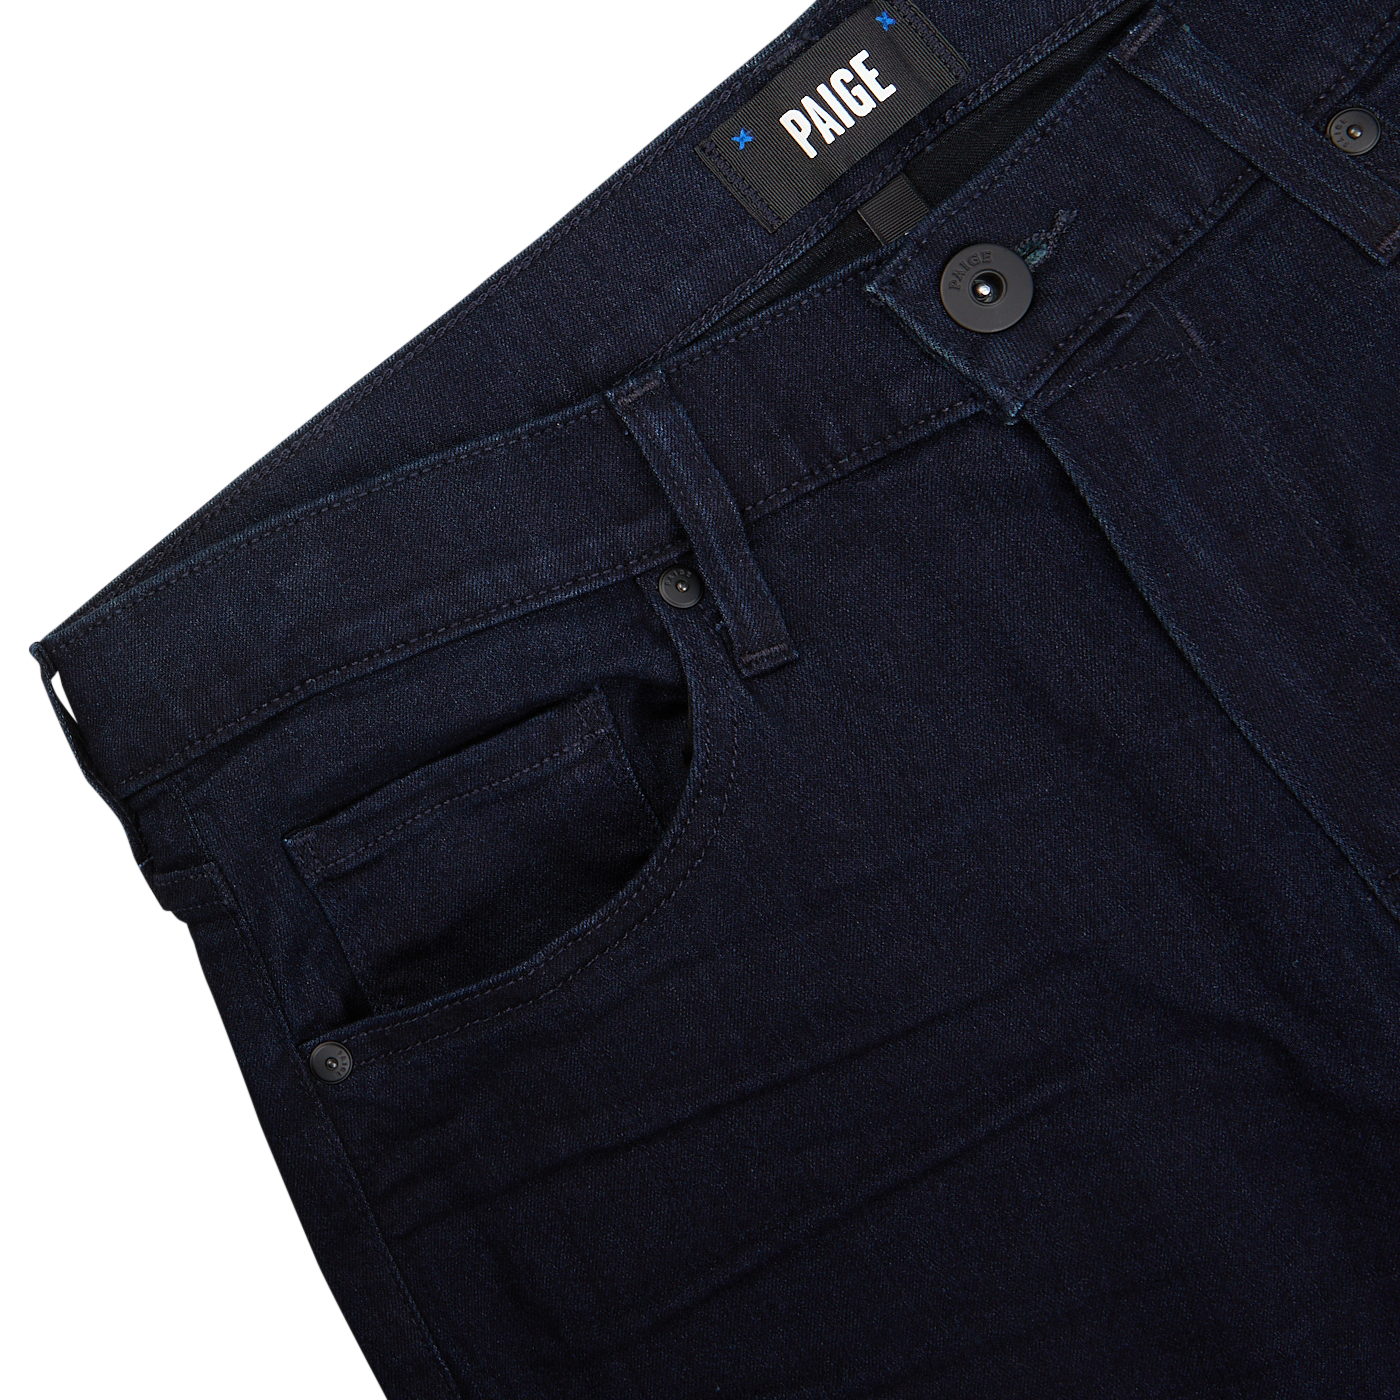 Paige Inkwell Blue Cotton Transcend Normandie jeans close-up displaying waistband and pockets.